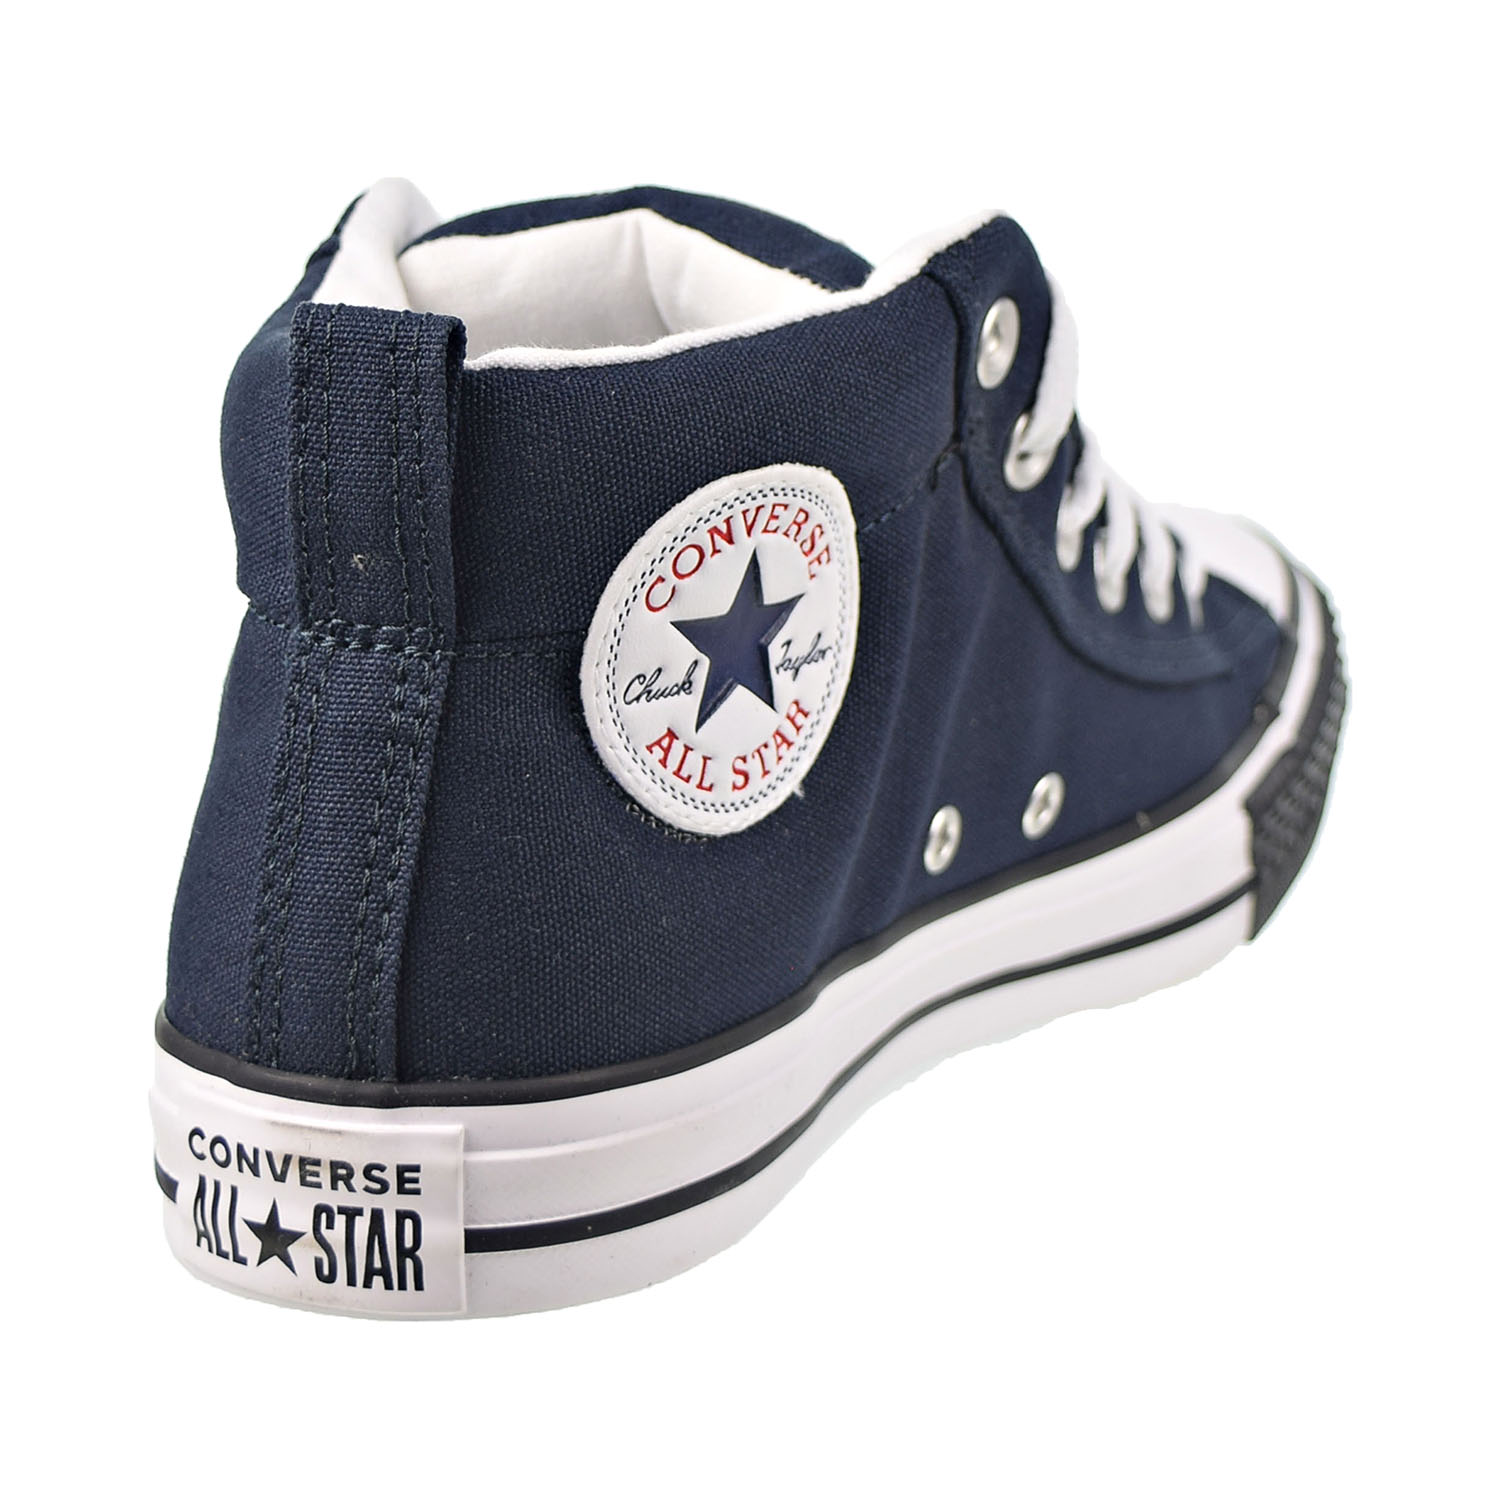 Converse Chuck Taylor All Star Street Mid Men's Shoes Dark Obsidian-White-Black 166337f - image 3 of 6